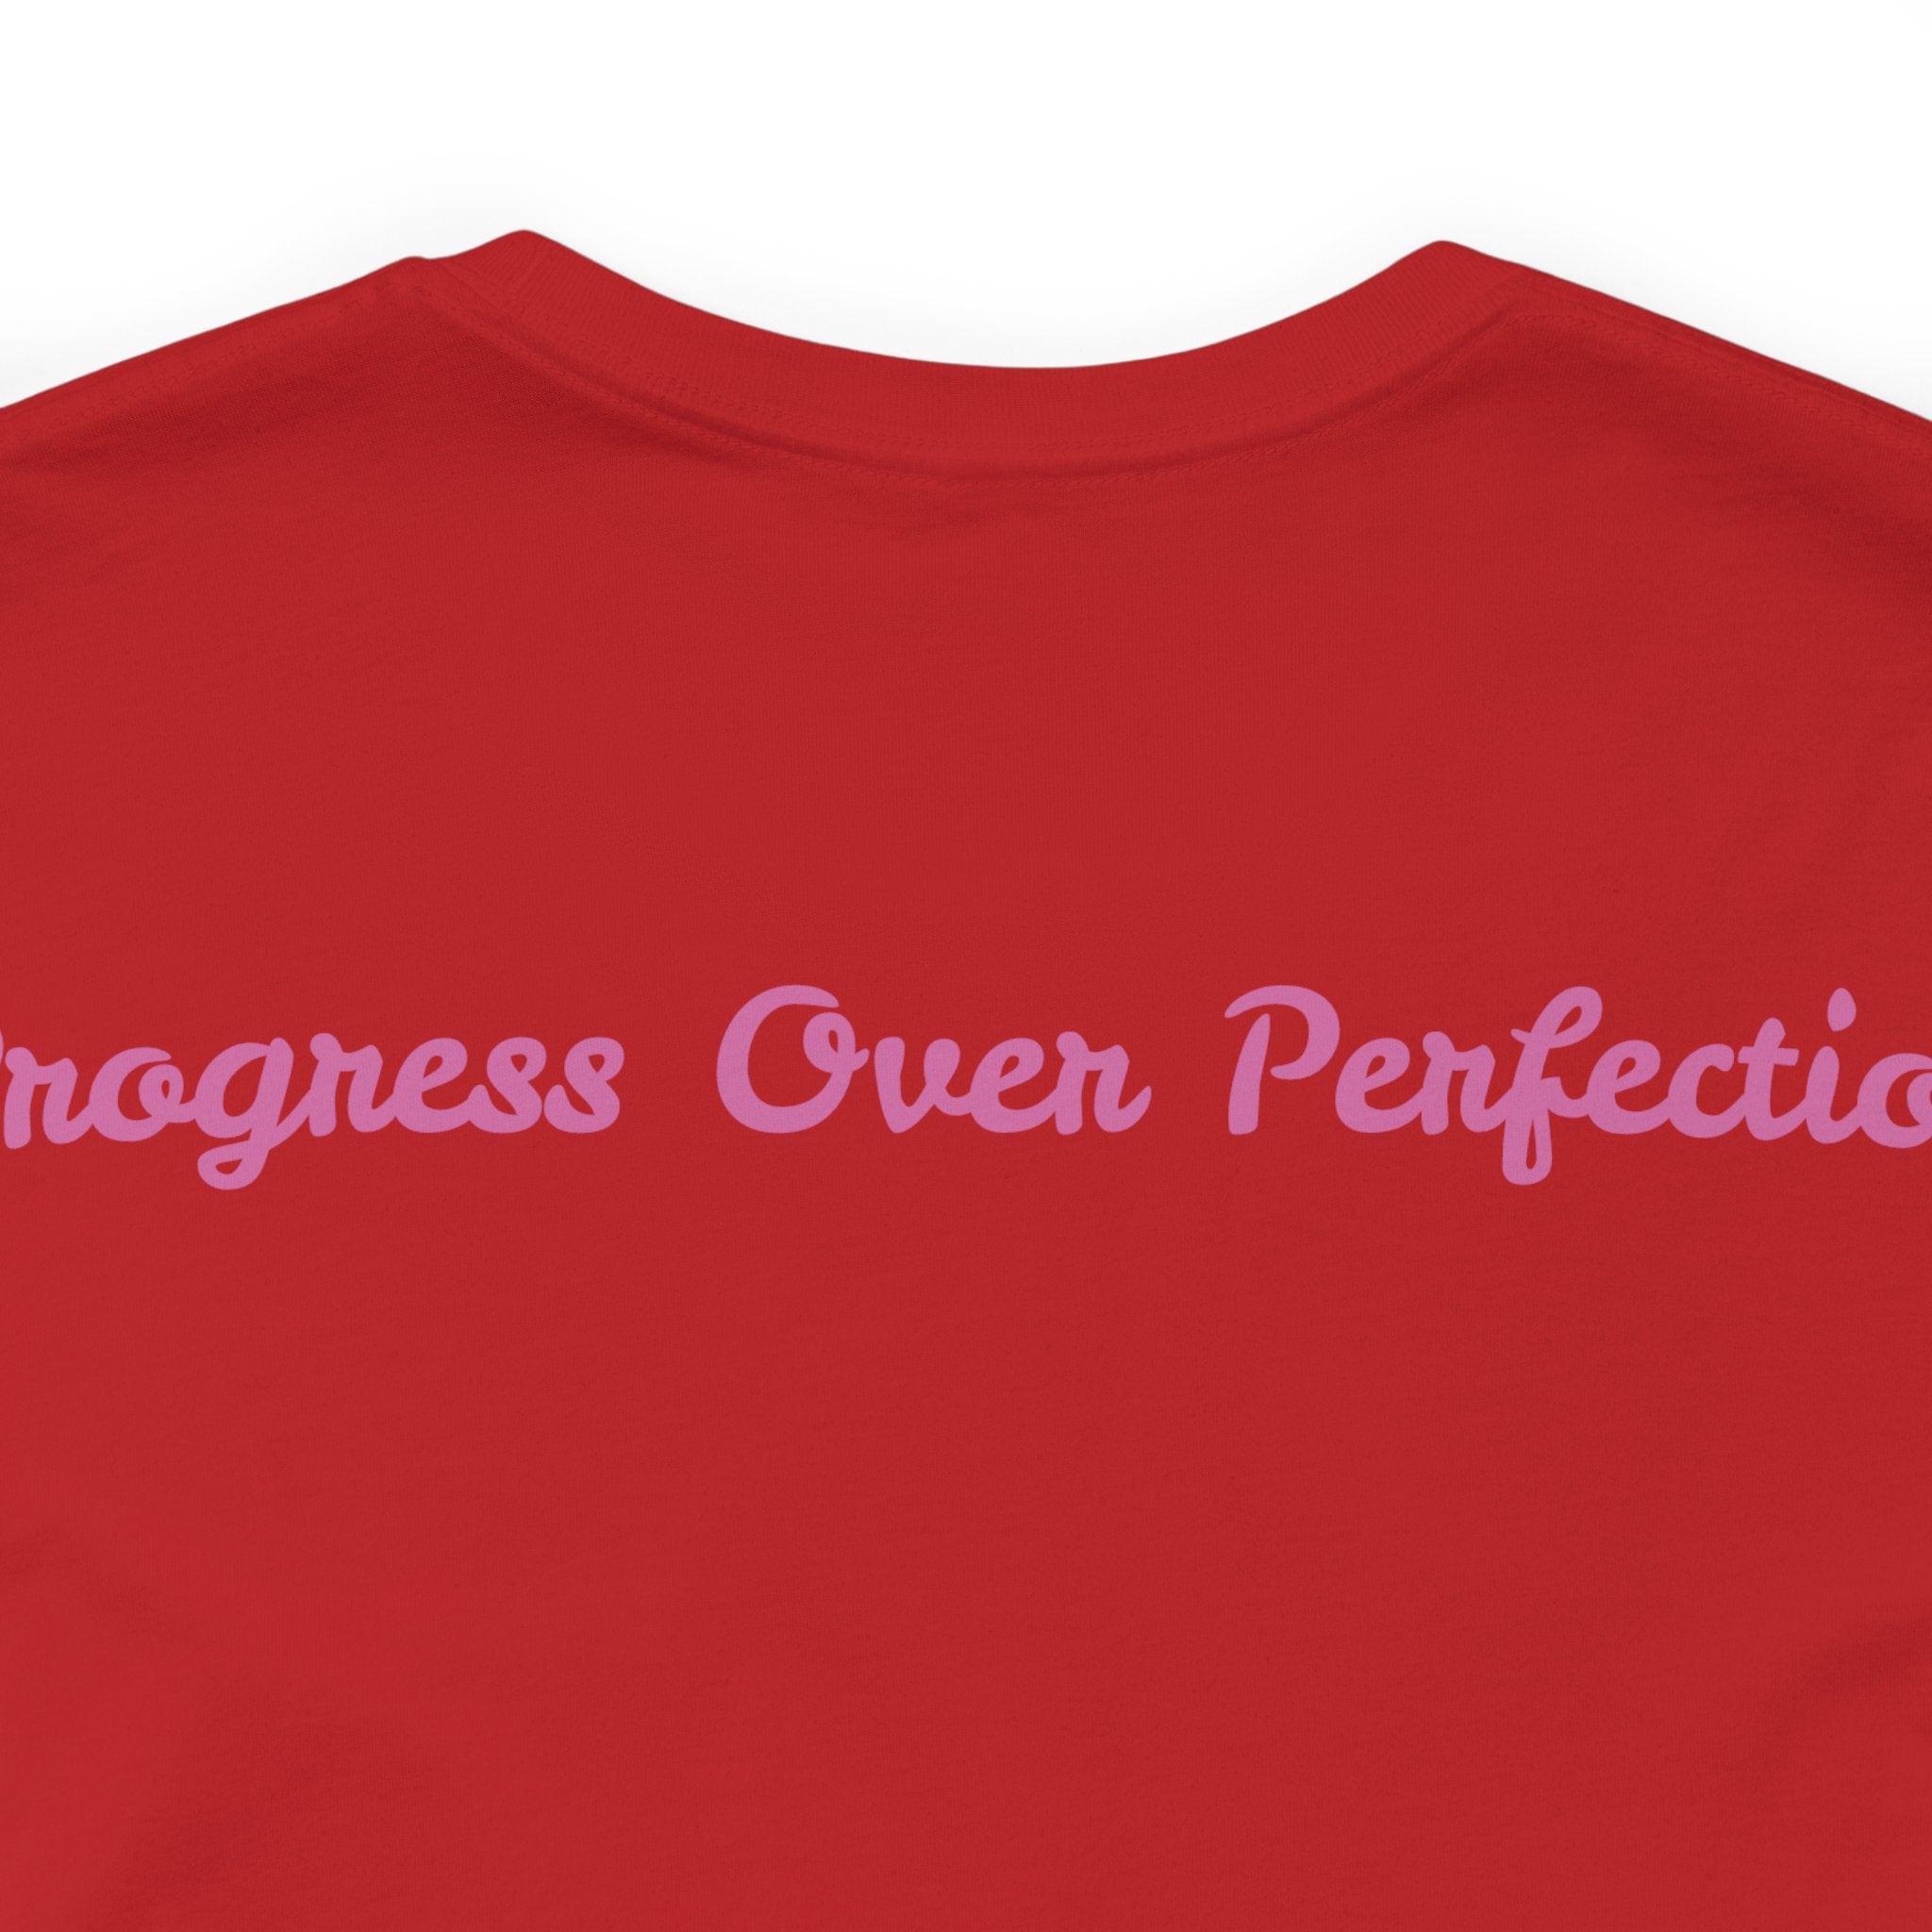 Progress Over Perfection Tee - Bella+Canvas 3001 Yellow Airlume Cotton Bella+Canvas 3001 Crew Neckline Jersey Short Sleeve Lightweight Fabric Mental Health Support Retail Fit Tear-away Label Tee Unisex Tee T-Shirt 68075552910466330_2048 Printify